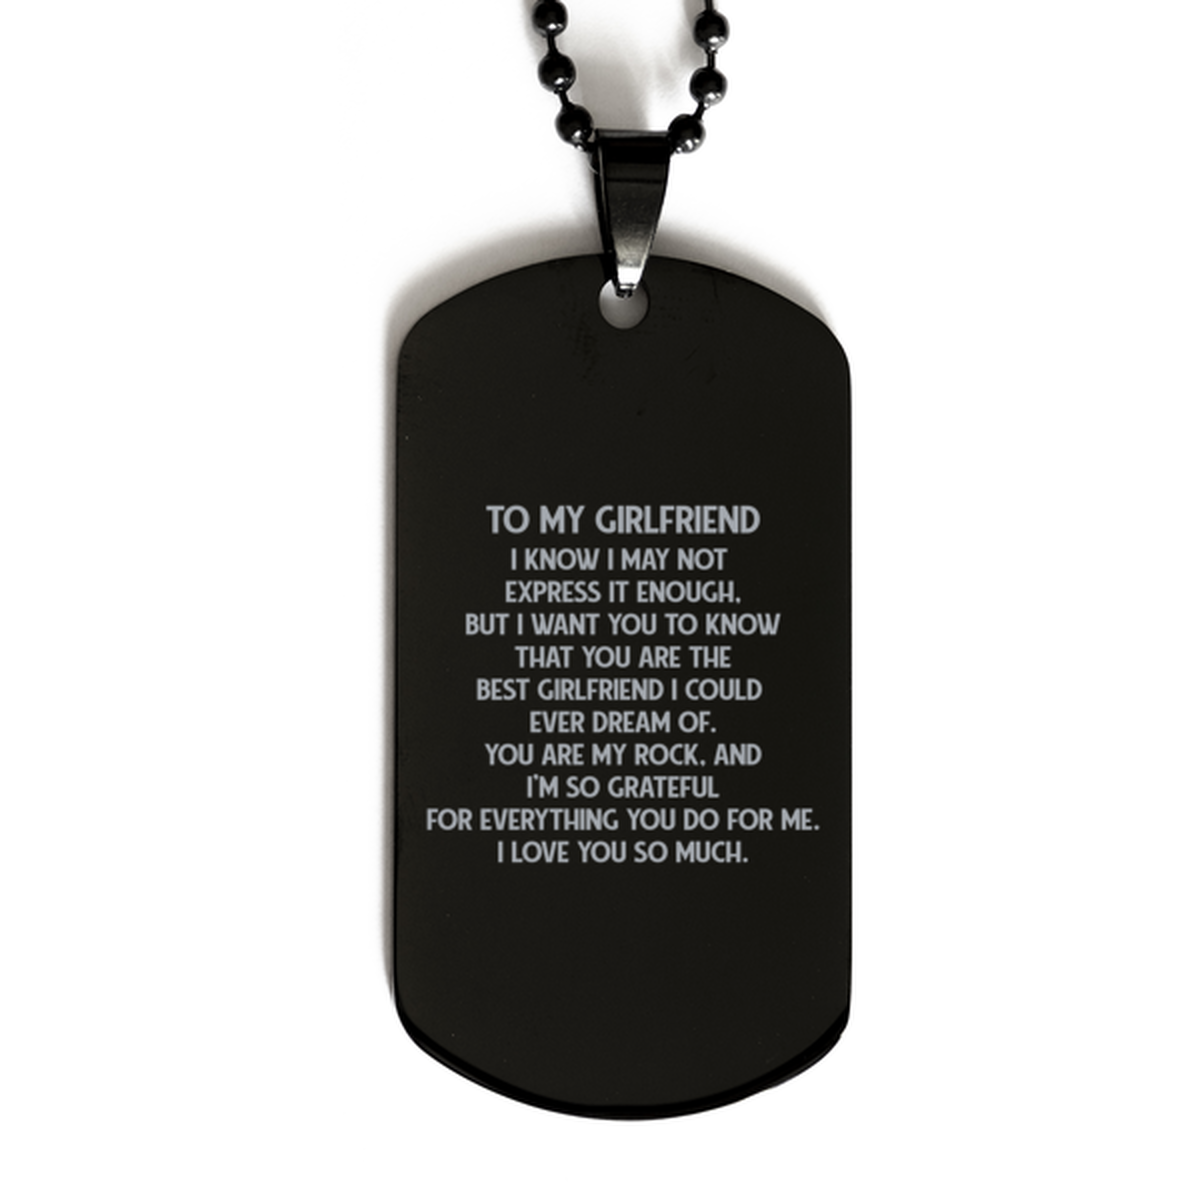 To My Girlfriend Black Dog Tag, I Love You So Much, Birthday Gifts For Girlfriend From Boyfriend, Valentines Gifts For Women